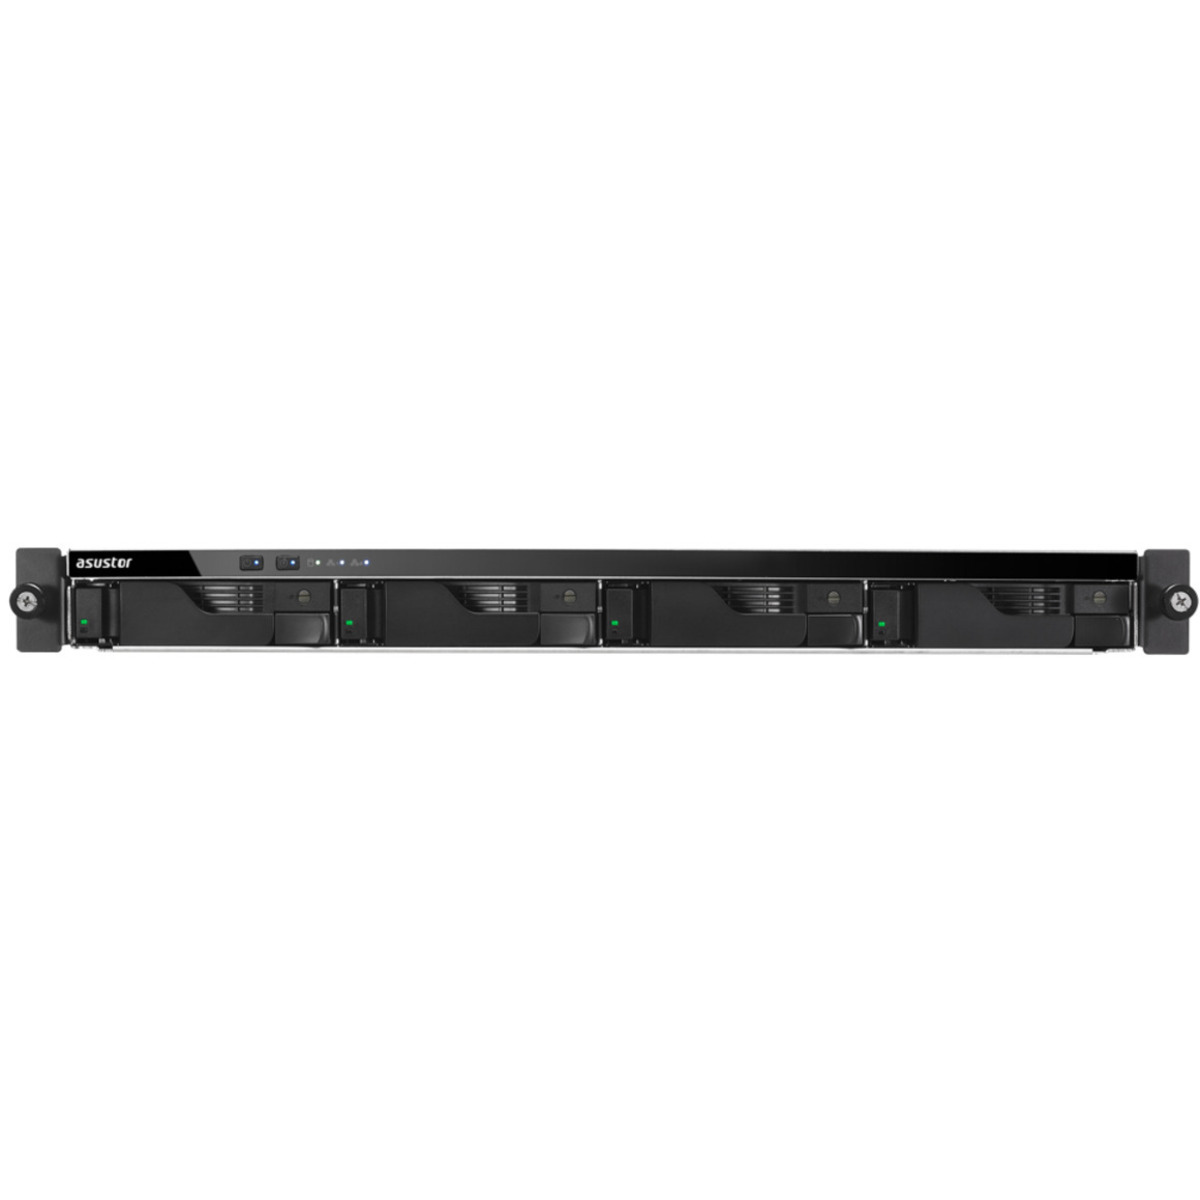 buy ASUSTOR LOCKERSTOR 4RS AS6504RS 16tb RackMount NAS - Network Attached Storage Device 4x4000gb Toshiba MN Series MN08ADA400E 3.5 7200rpm SATA 6Gb/s HDD NAS Class Drives Installed - Burn-In Tested - ON SALE - FREE RAM UPGRADE - nas headquarters buy network attached storage server device das new raid-5 free shipping simply usa LOCKERSTOR 4RS AS6504RS